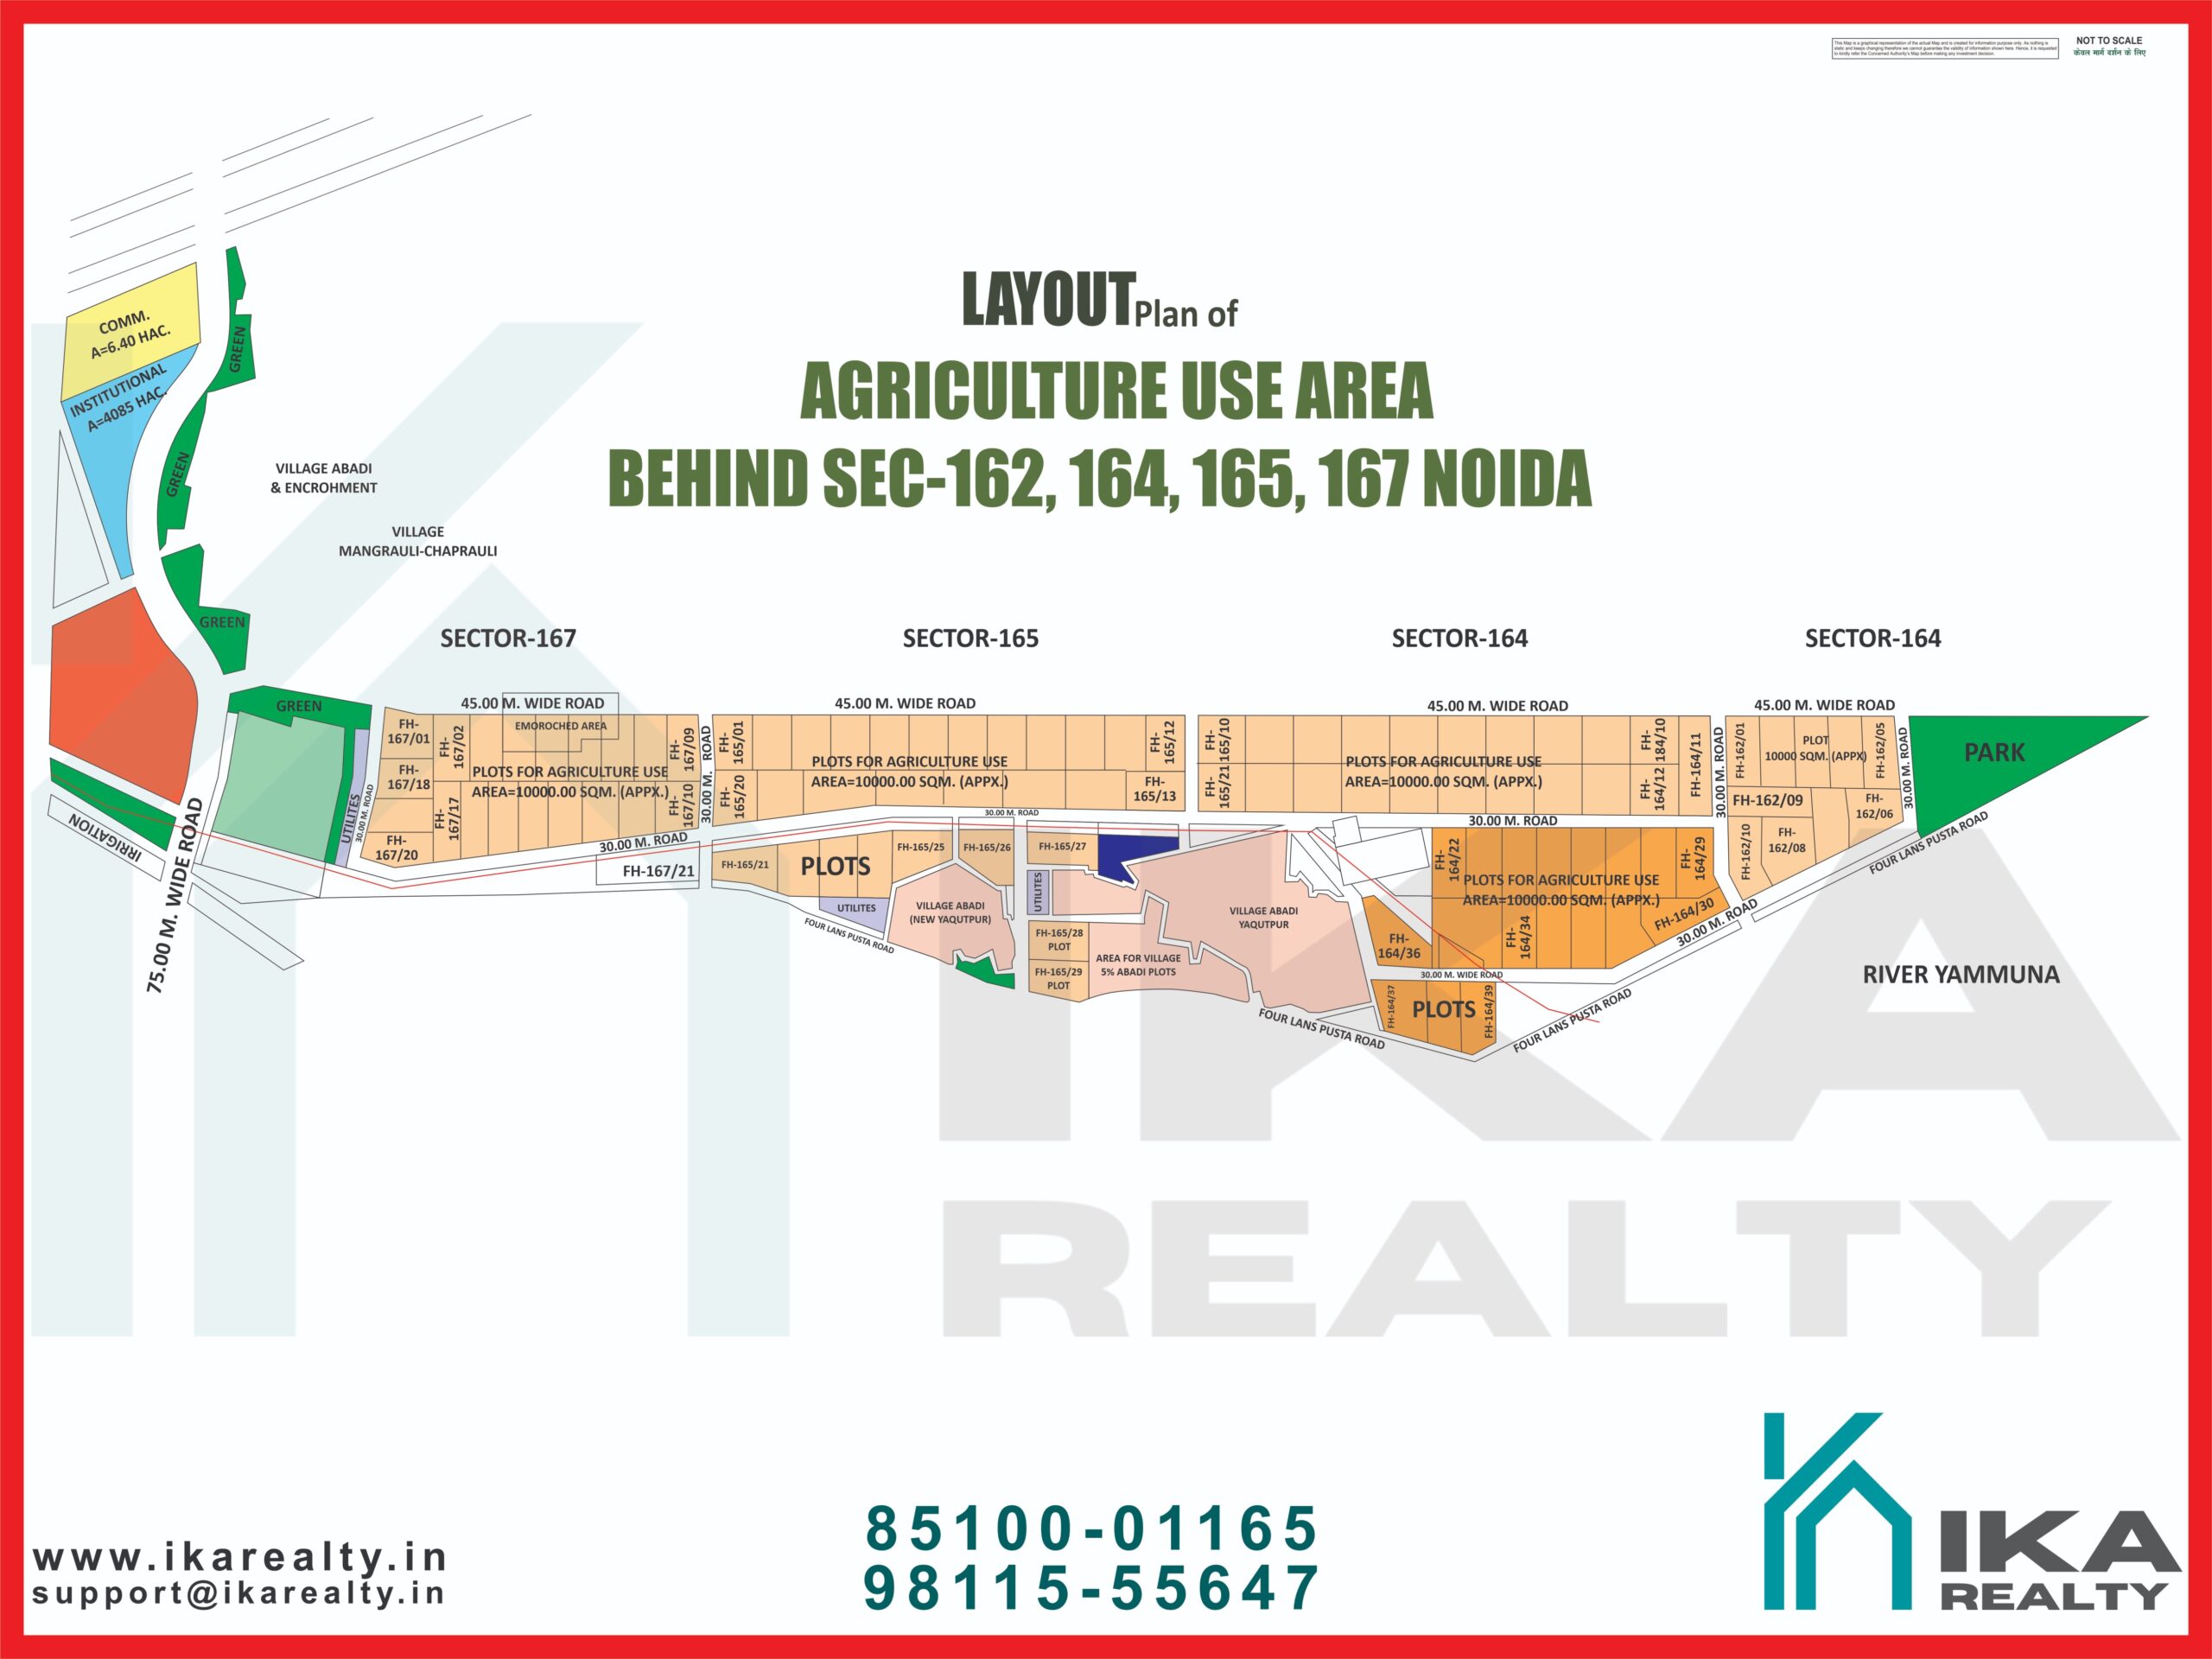 Agriculture use area behind sec-162, 164, 165, 167 Noida